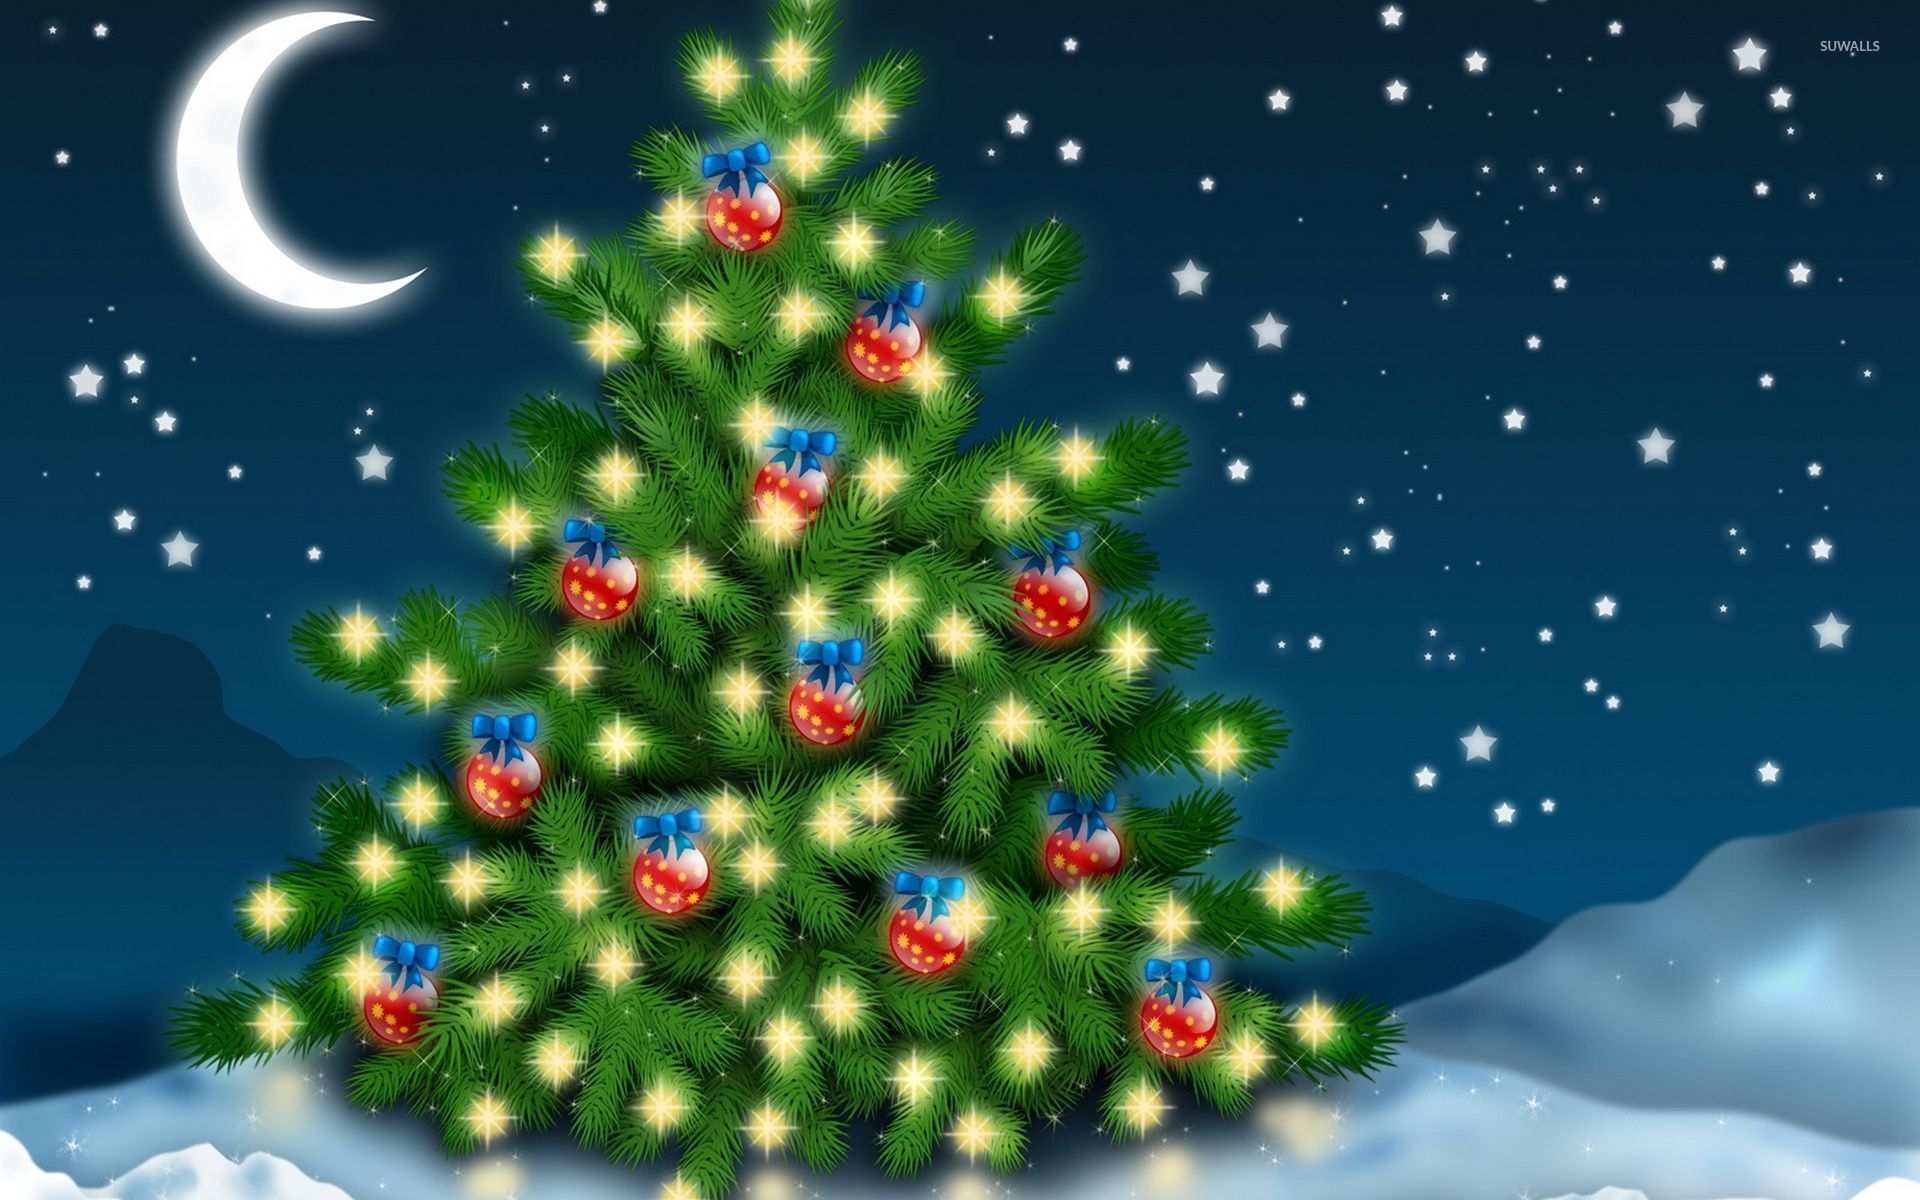 Red baubles with blue bows in the Christmas tree wallpaper wallpaper